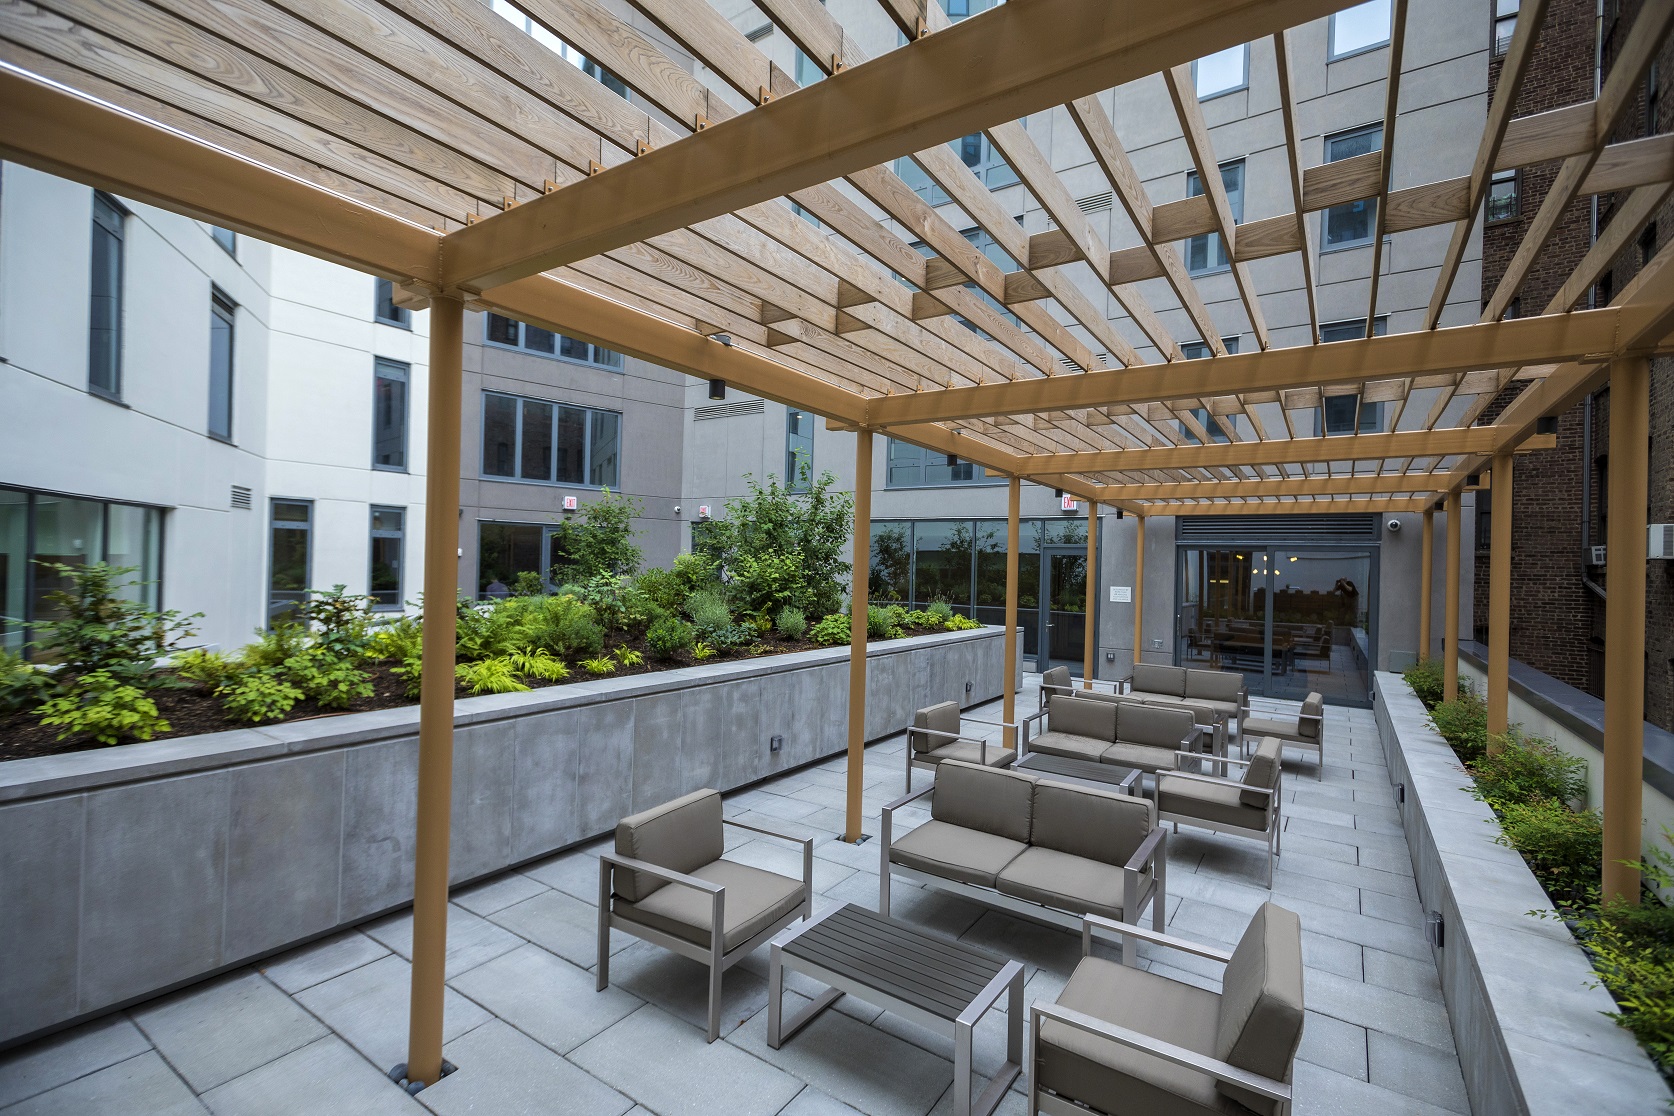 Expertly installed landscape elements create a beautiful, peaceful and sustainable amenity for the residents of this building